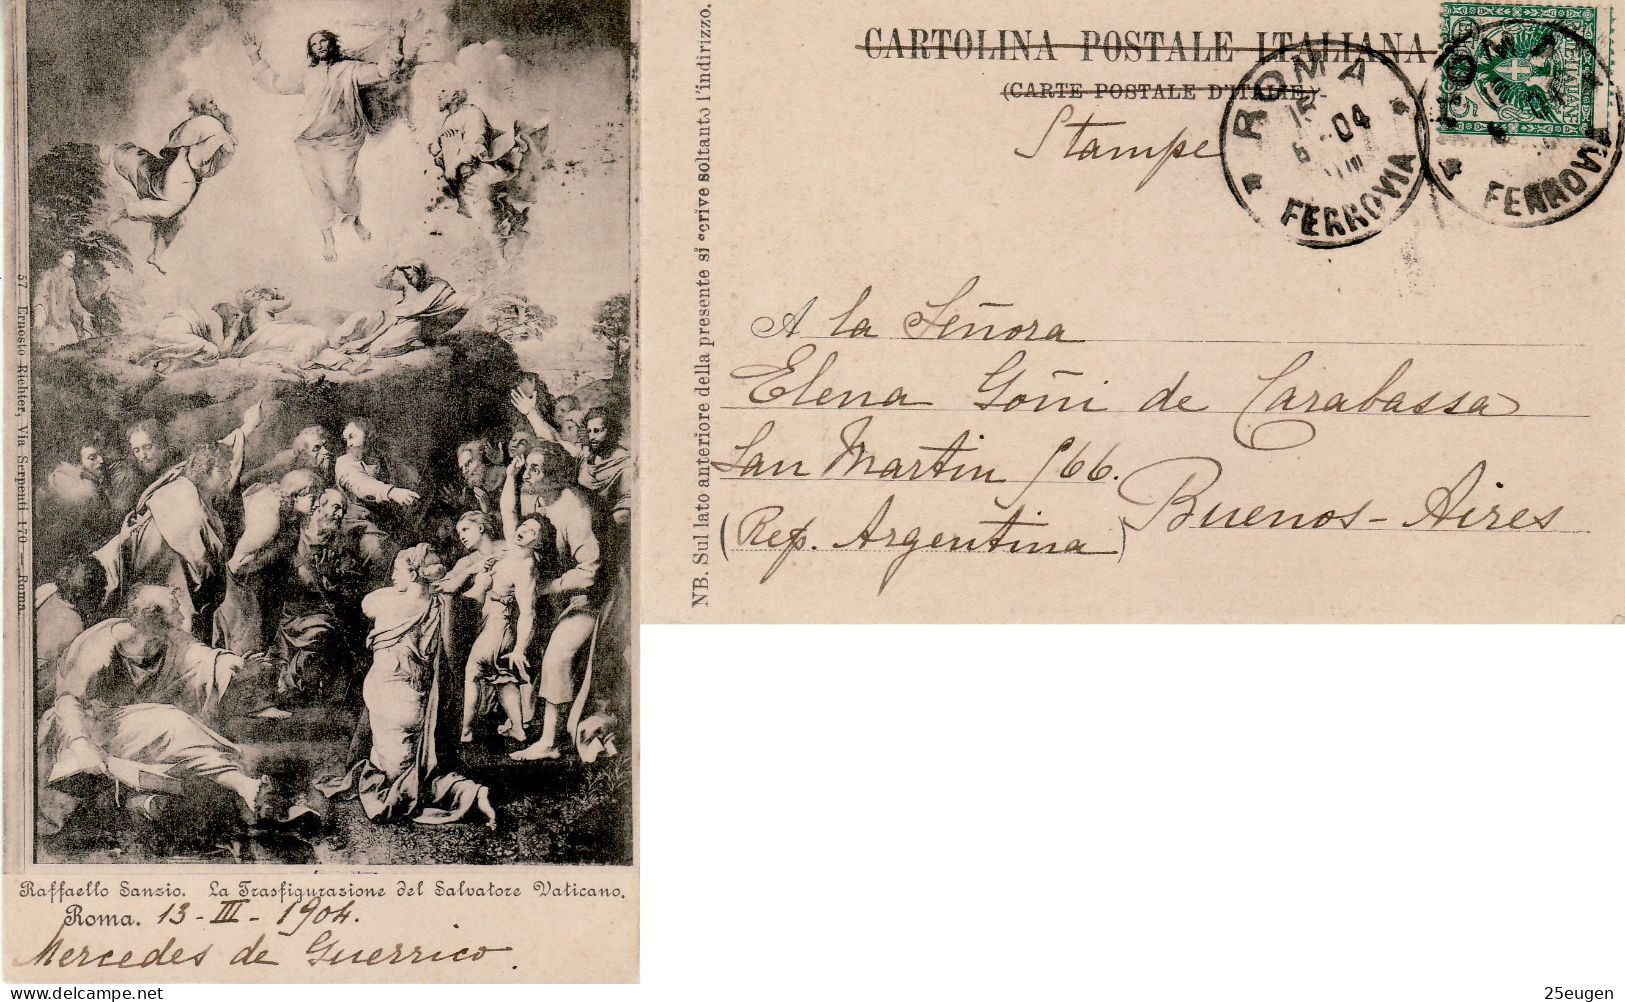 ITALY 1904 POSTCARD SENT FROM ROMA TO BUENOS AIRES - Marcofilie